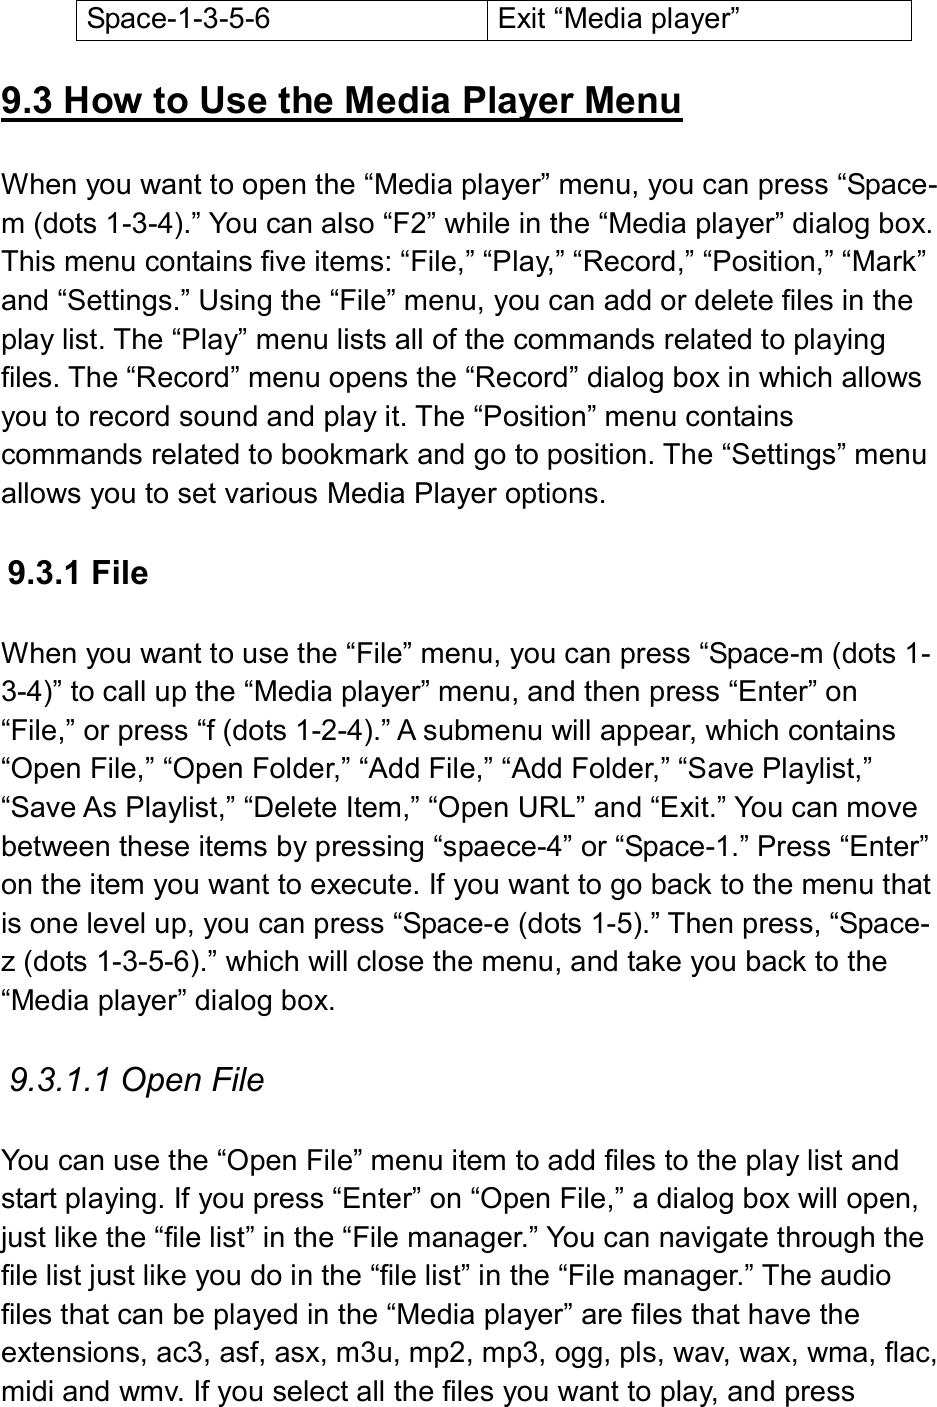  Space-1-3-5-6  Exit “Media player”  9.3 How to Use the Media Player Menu  When you want to open the “Media player” menu, you can press “Space-m (dots 1-3-4).” You can also “F2” while in the “Media player” dialog box. This menu contains five items: “File,” “Play,” “Record,” “Position,” “Mark” and “Settings.” Using the “File” menu, you can add or delete files in the play list. The “Play” menu lists all of the commands related to playing files. The “Record” menu opens the “Record” dialog box in which allows you to record sound and play it. The “Position” menu contains commands related to bookmark and go to position. The “Settings” menu allows you to set various Media Player options.  9.3.1 File  When you want to use the “File” menu, you can press “Space-m (dots 1-3-4)” to call up the “Media player” menu, and then press “Enter” on “File,” or press “f (dots 1-2-4).” A submenu will appear, which contains “Open File,” “Open Folder,” “Add File,” “Add Folder,” “Save Playlist,” “Save As Playlist,” “Delete Item,” “Open URL” and “Exit.” You can move between these items by pressing “spaece-4” or “Space-1.” Press “Enter” on the item you want to execute. If you want to go back to the menu that is one level up, you can press “Space-e (dots 1-5).” Then press, “Space-z (dots 1-3-5-6).” which will close the menu, and take you back to the “Media player” dialog box.  9.3.1.1 Open File  You can use the “Open File” menu item to add files to the play list and start playing. If you press “Enter” on “Open File,” a dialog box will open, just like the “file list” in the “File manager.” You can navigate through the file list just like you do in the “file list” in the “File manager.” The audio files that can be played in the “Media player” are files that have the extensions, ac3, asf, asx, m3u, mp2, mp3, ogg, pls, wav, wax, wma, flac, midi and wmv. If you select all the files you want to play, and press 